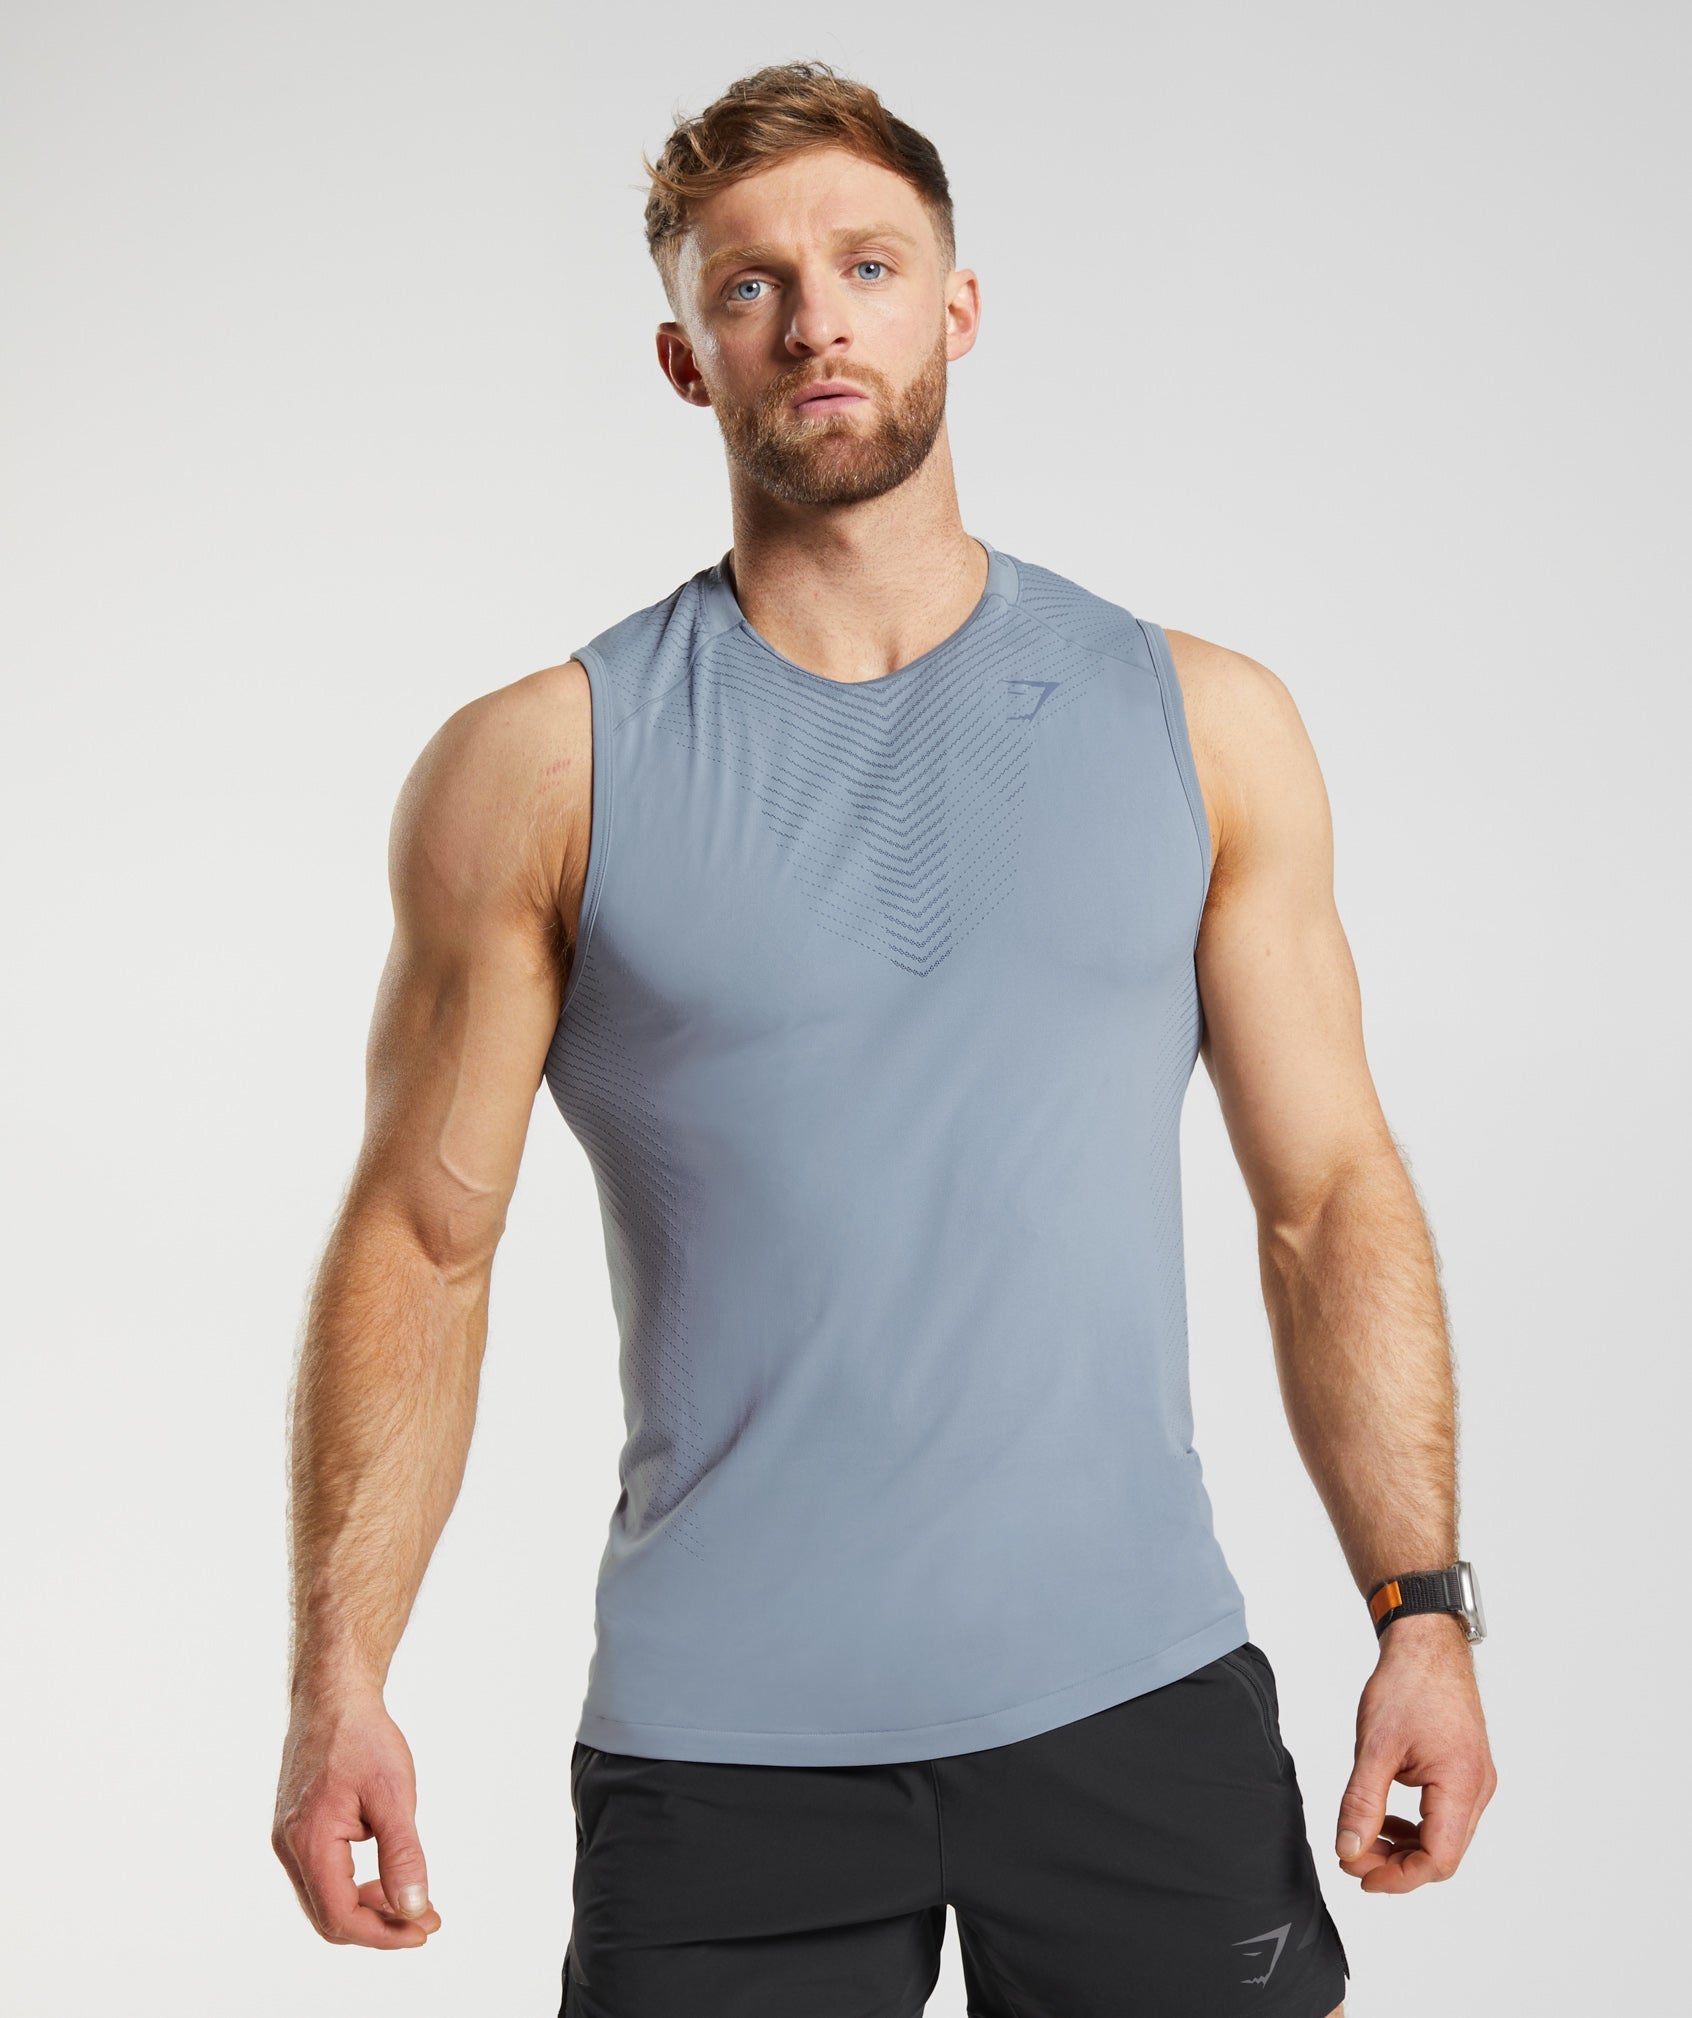 Apex Tank in {{variantColor} is out of stock